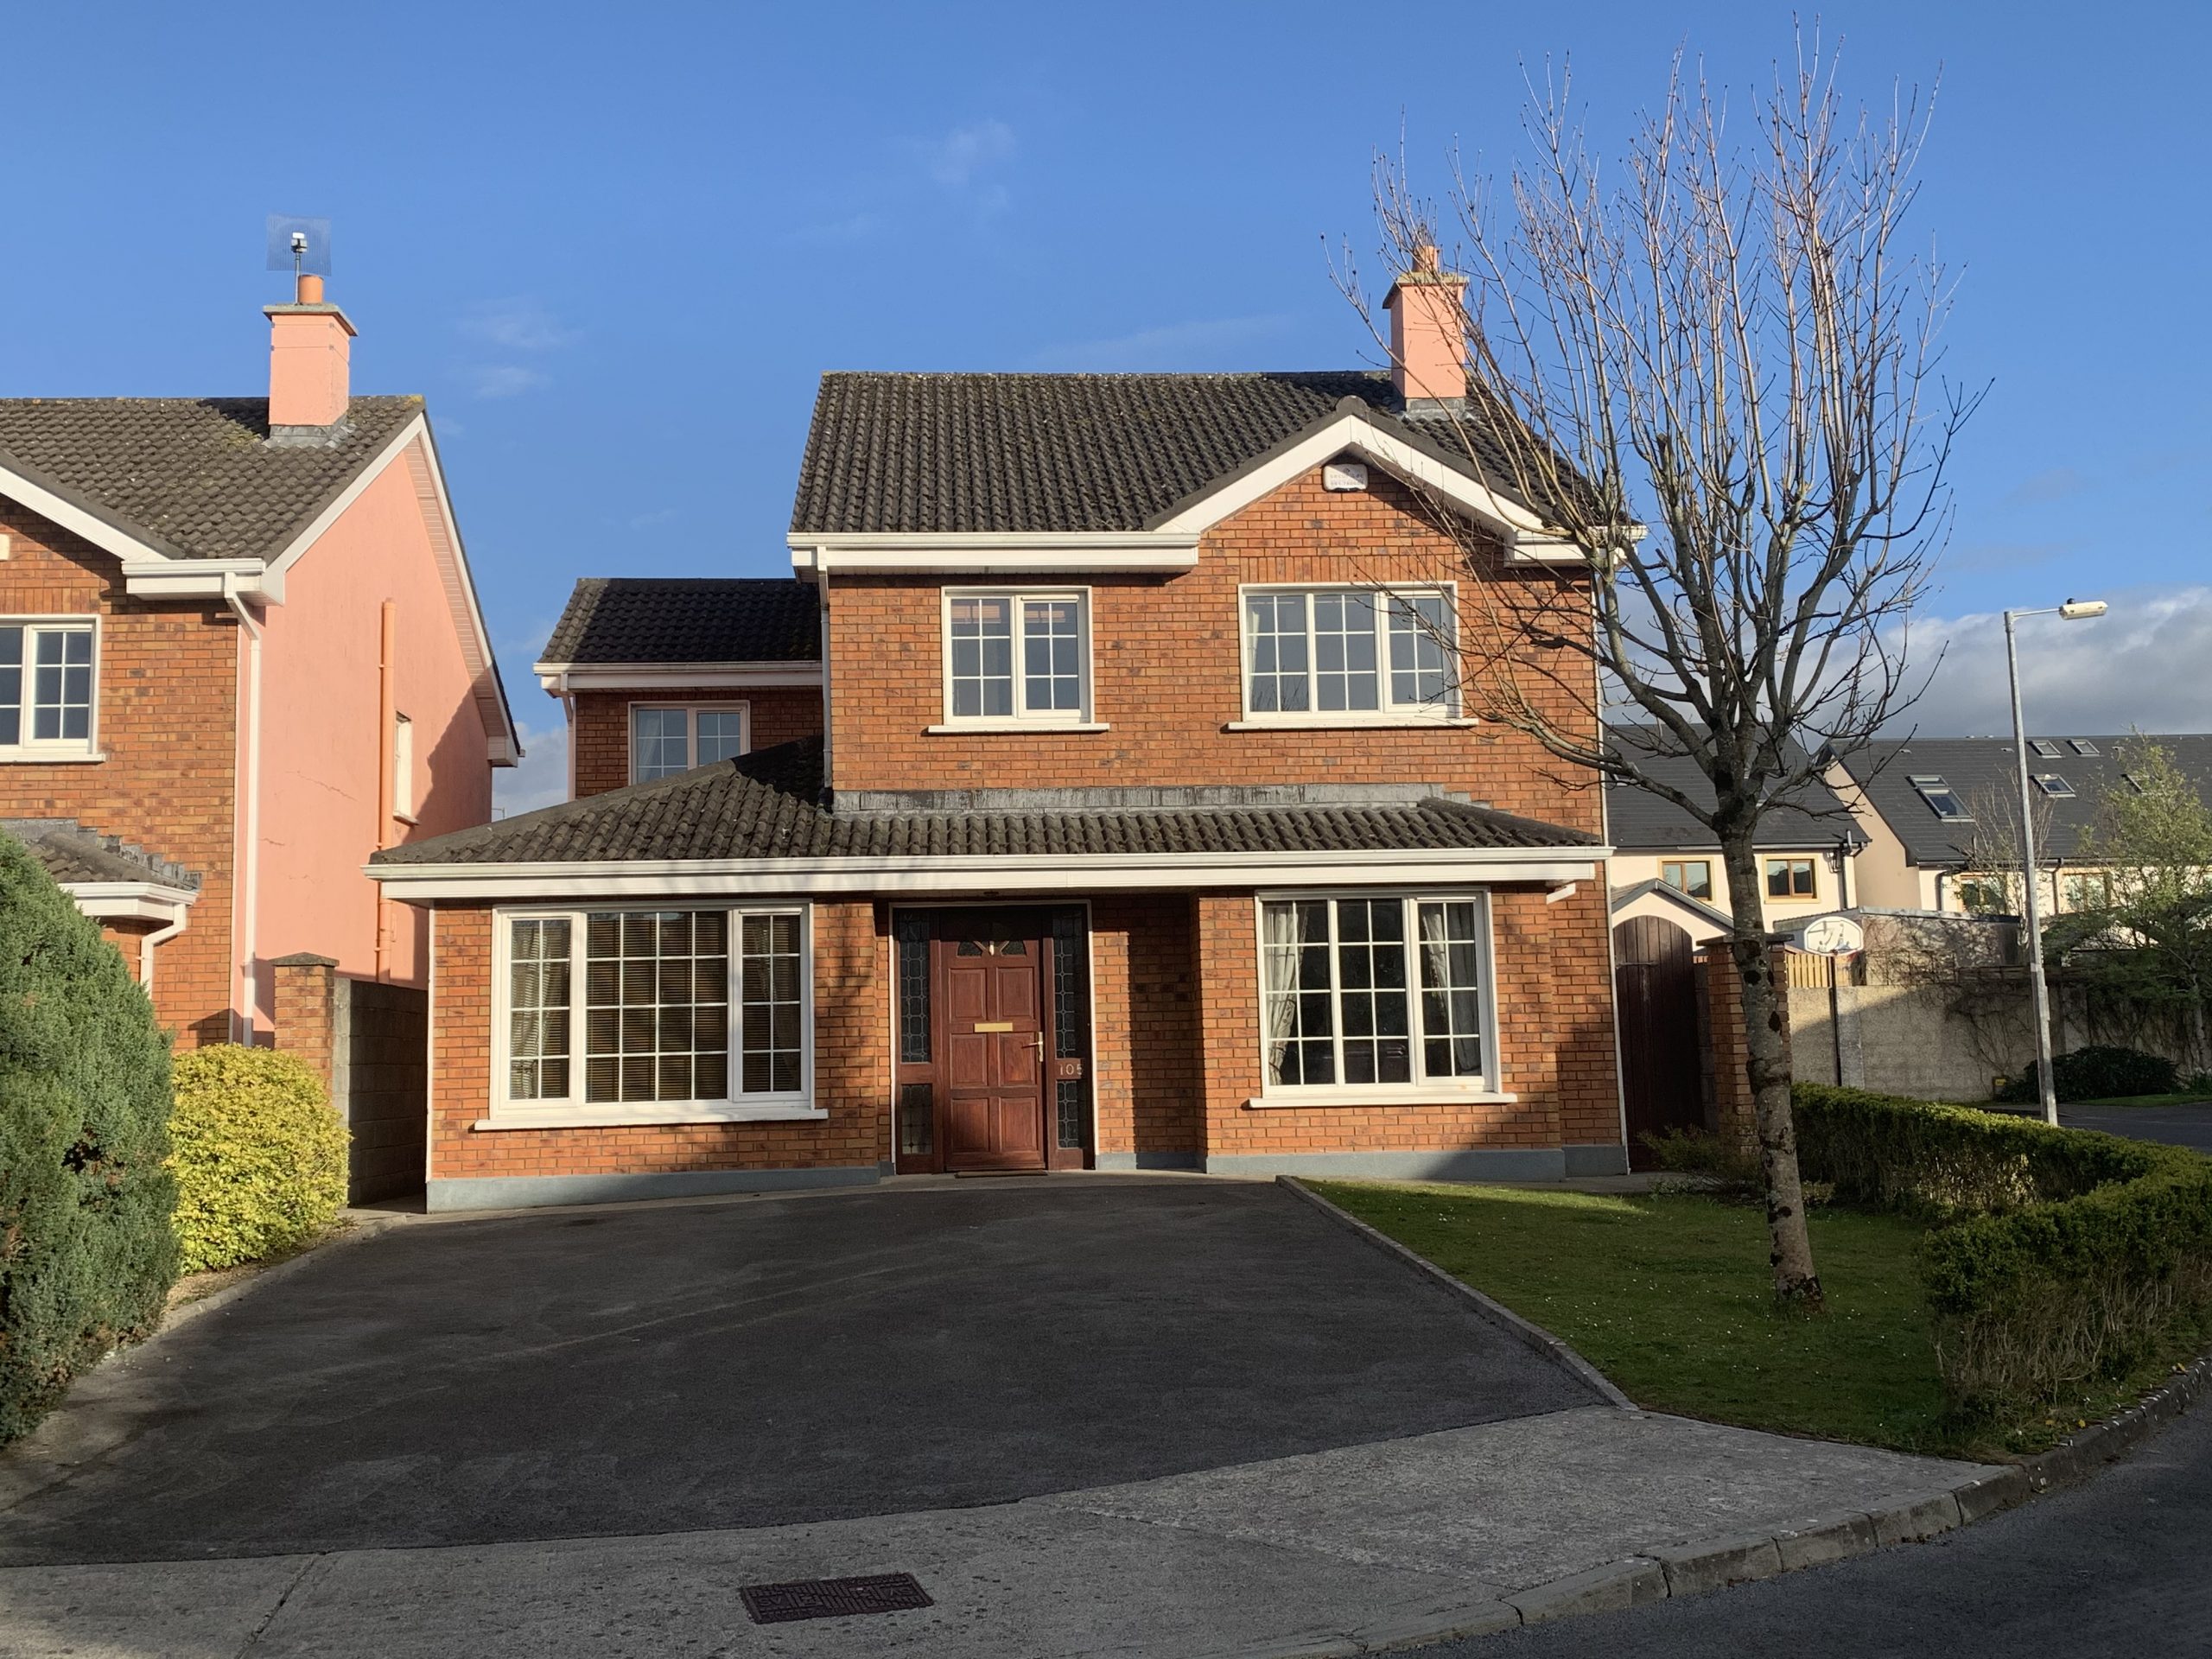 105 Bluebell Woods, Oranmore, Co. Galway 4 Bed  3 Bath  138 m²  Detached